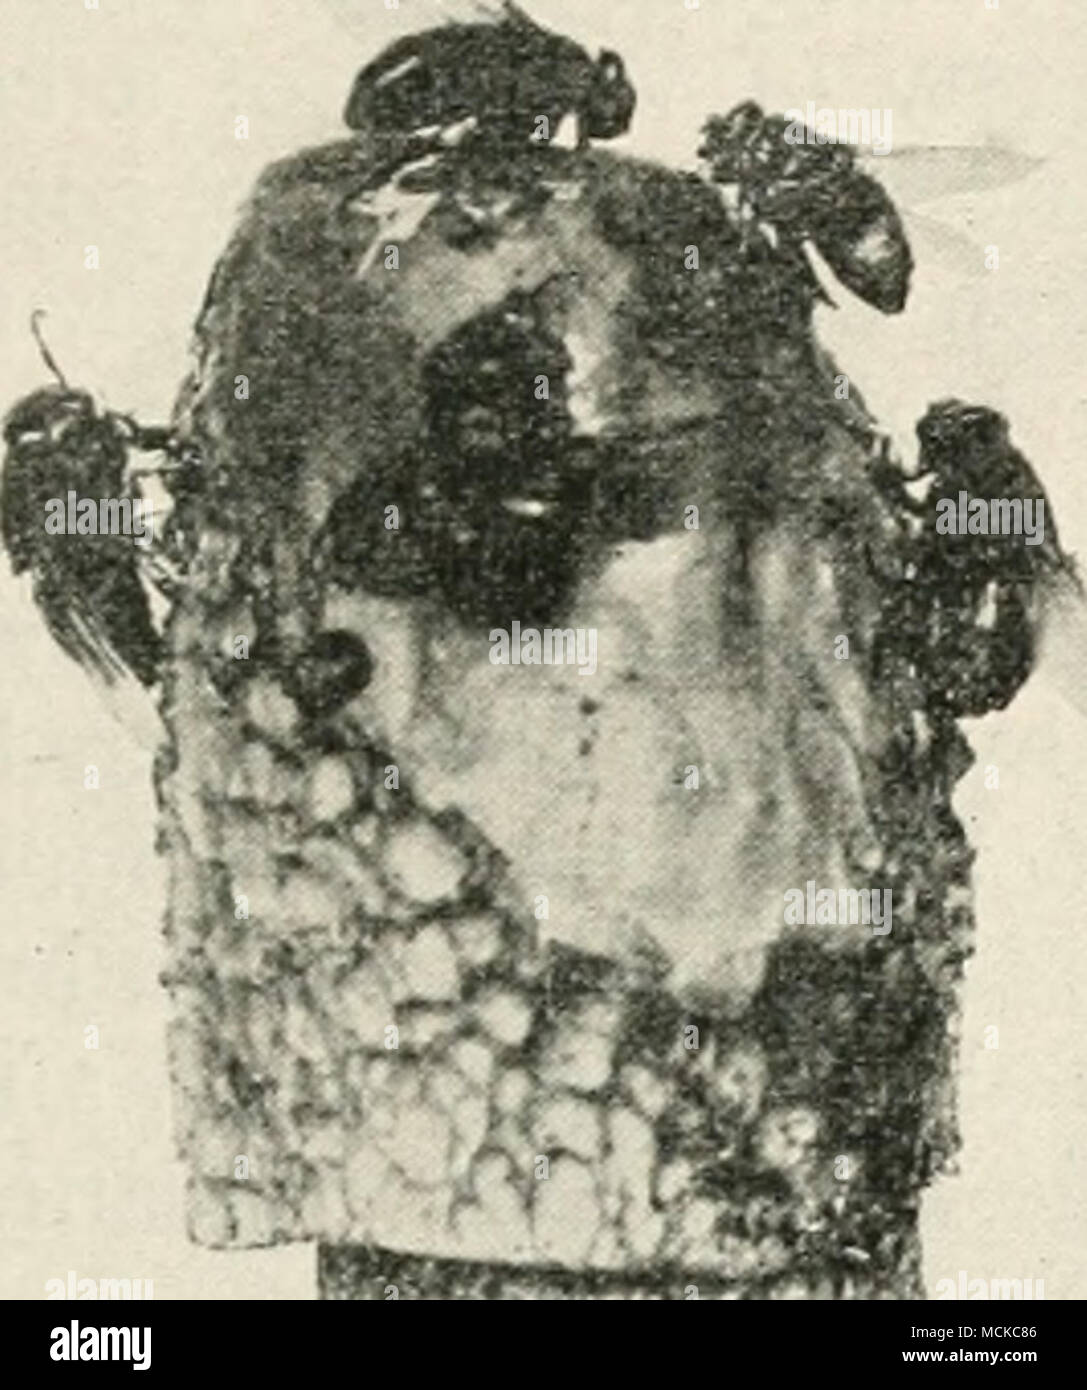 . Fig. 107.—Ithyphallus caniinis. Hymenium of fungus partly covered with olive mucus, in which the very minute spores are embedded. Several flies are present feeding on the mucus. Nat. size. smell. The fungus will be readily recognised by the aid of the accompanying illustration. Mixing the soil with quicklime kills the mycelium. Istvanffi, G., Ann. de rinst. Atnpelog. Roy. Hongrois, 3 (1904). AGARICACEAE The members of this group come under the category of mushrooms and toadstools, in common parlance, and are z Stock Photo